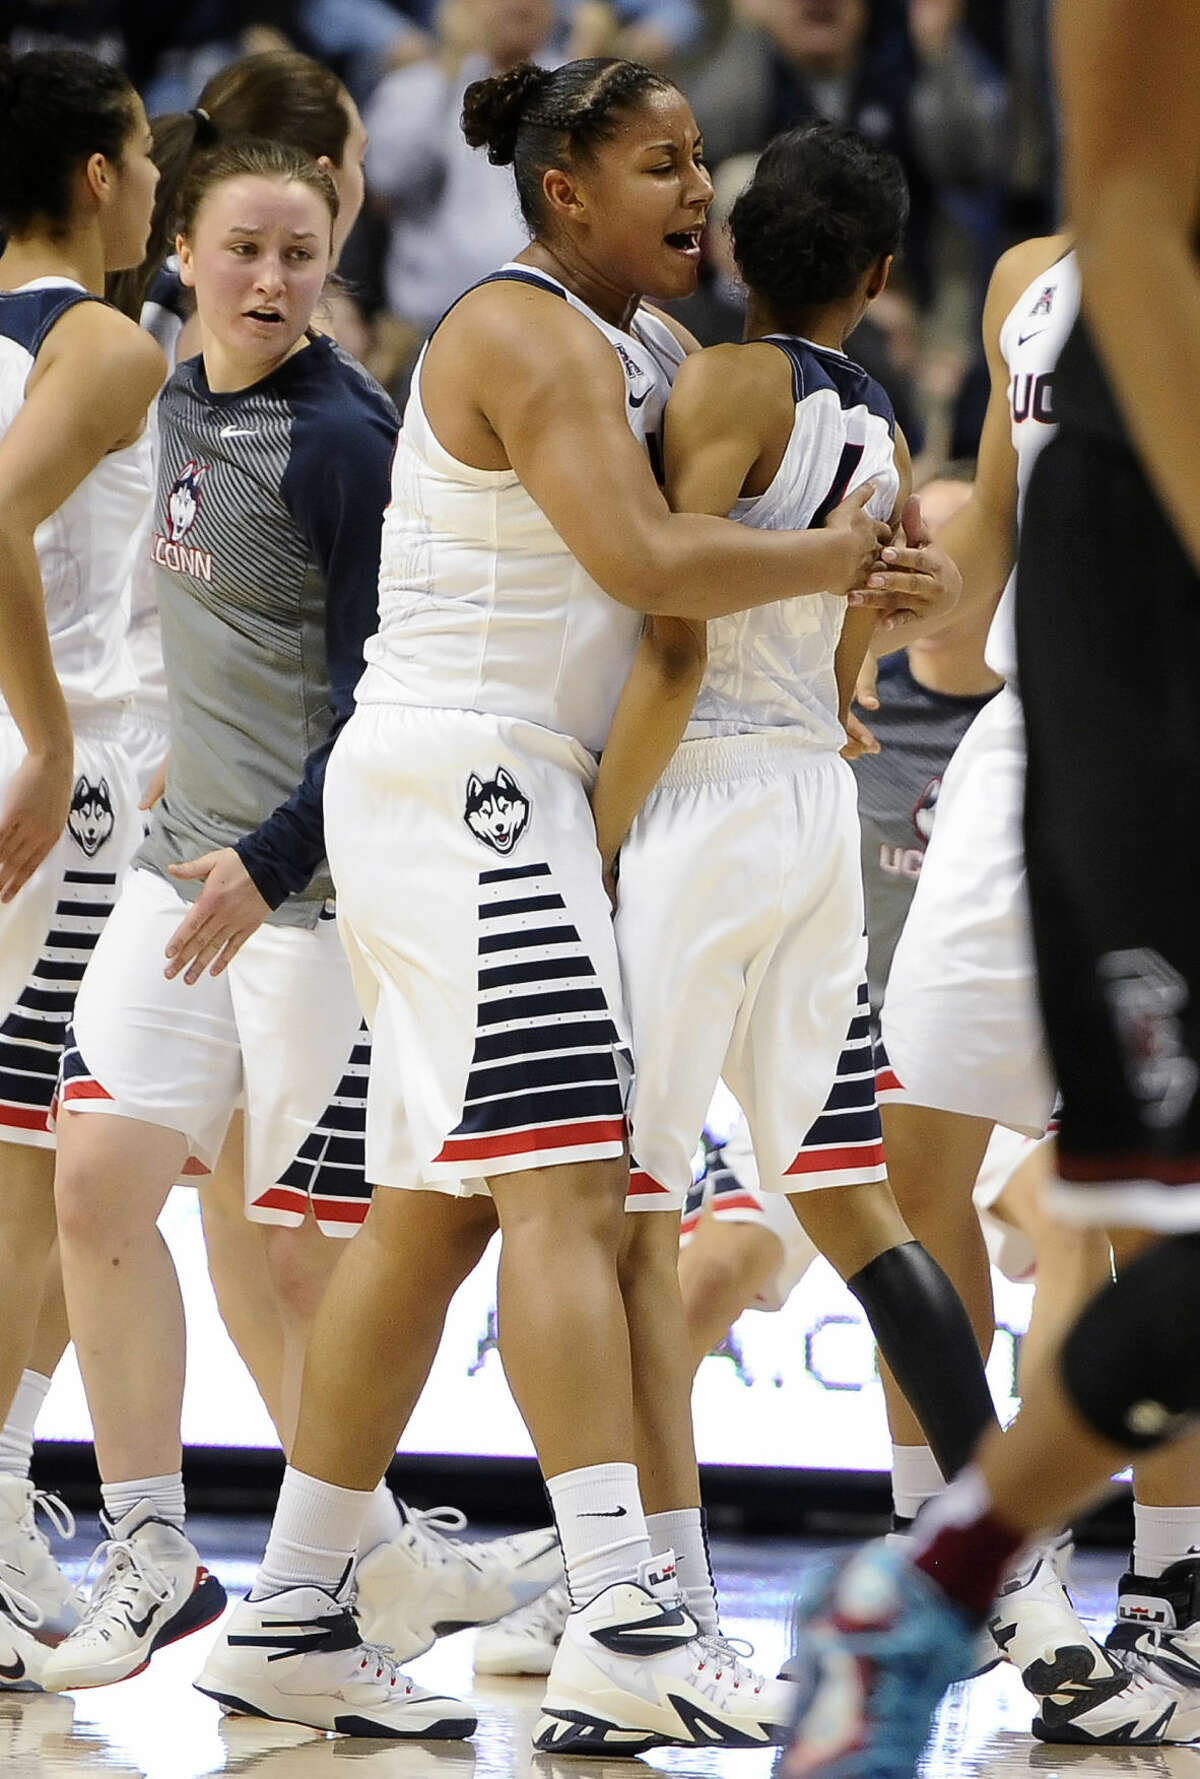 Connecticut’s Kaleena Mosqueda-Lewis, center, hugs teammate Moriah Jefferson, right, during the first half of an NCAA college basketball game, Monday, Feb. 9, 2015, in Storrs, Conn. (AP Photo/Jessica Hill)